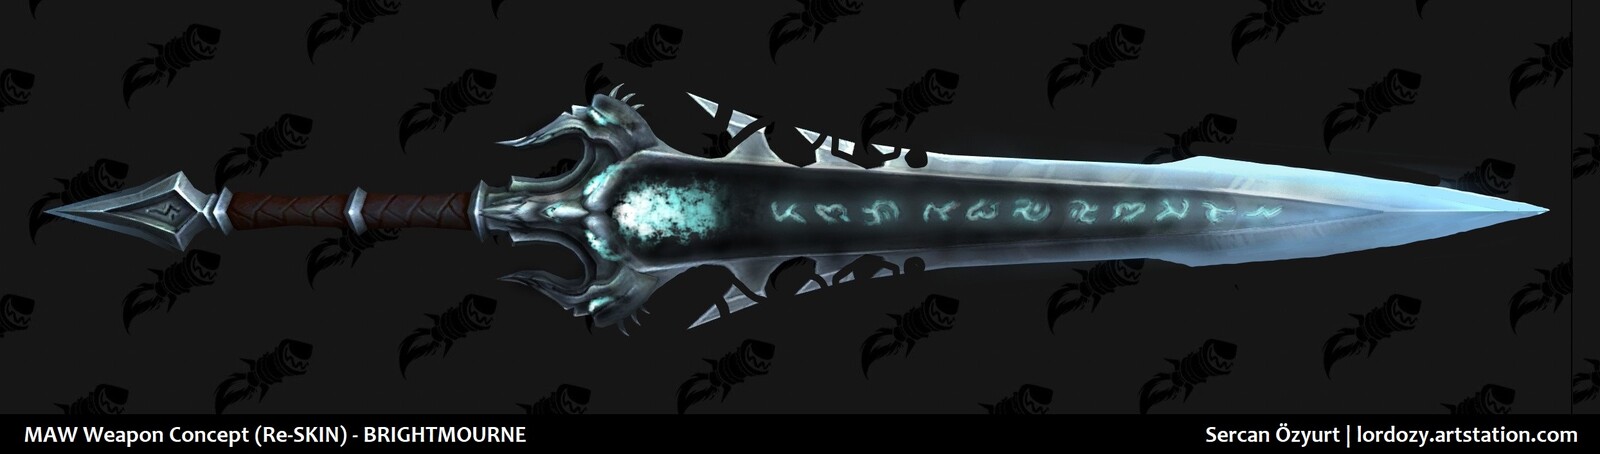 [Fan Concept] Shadowlands Maw Weapon (Re-skin) - World of Warcraft